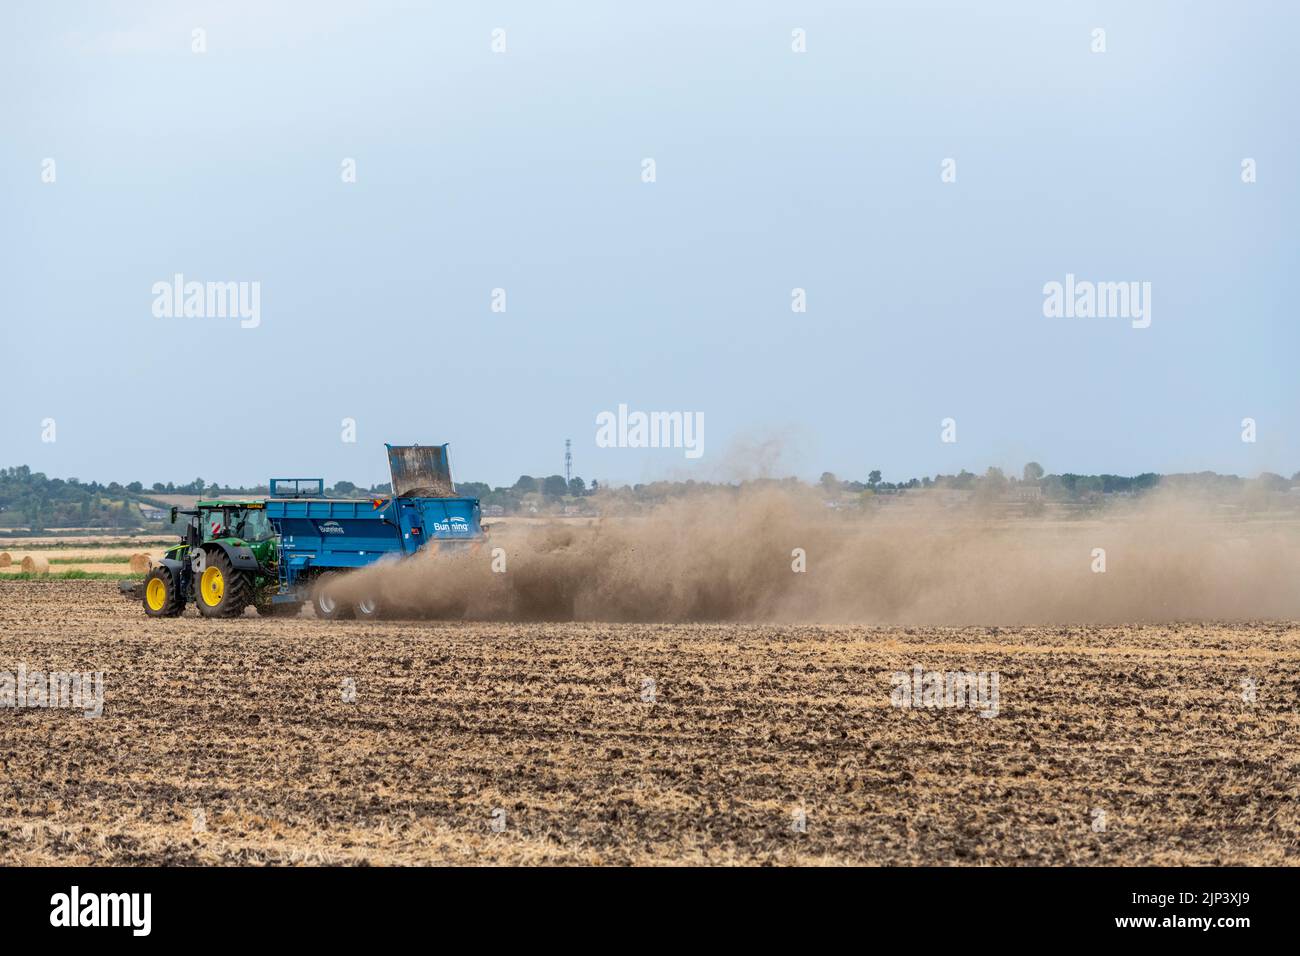 Aldreth, Cambridgeshire, UK. 15th Aug, 2022. A farmer spreads lime on an arable field making the most of the dry weather before thunder storms and rain are forecast across much of the UK. The arid conditions causes dust to fly and the UK weather is forecast to cool down with periods of rain. Credit: Julian Eales/Alamy Live News Stock Photo